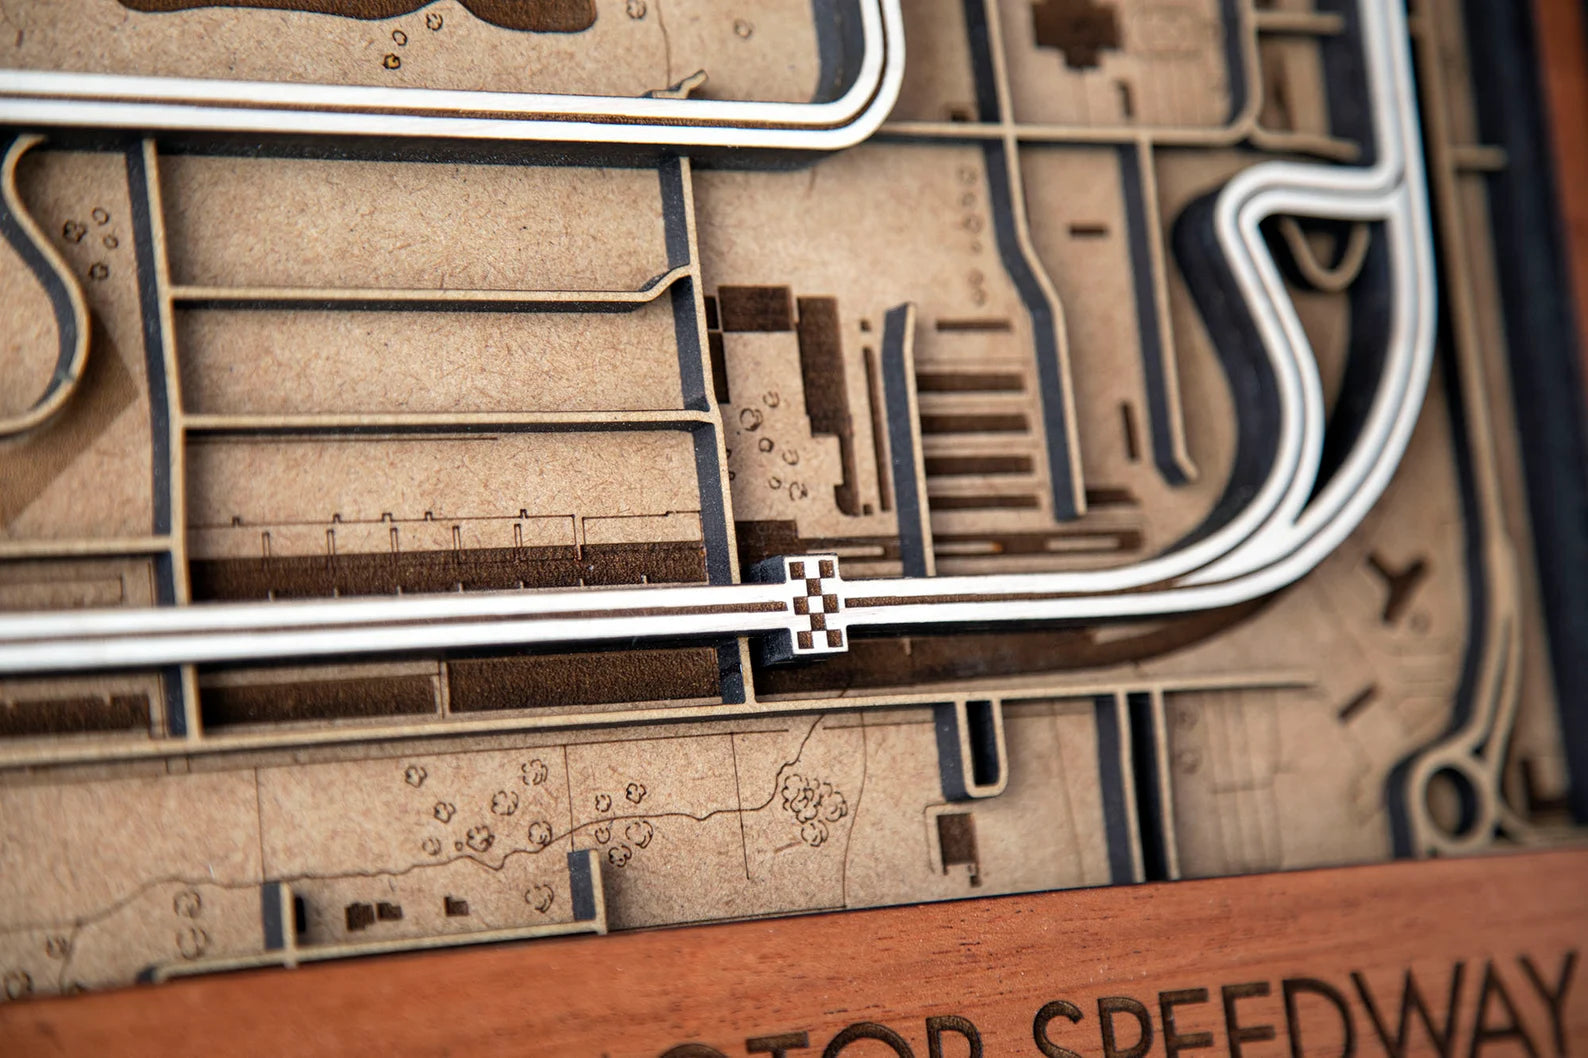 Indianapolis Motor Speedway - 3D Wood Track Map